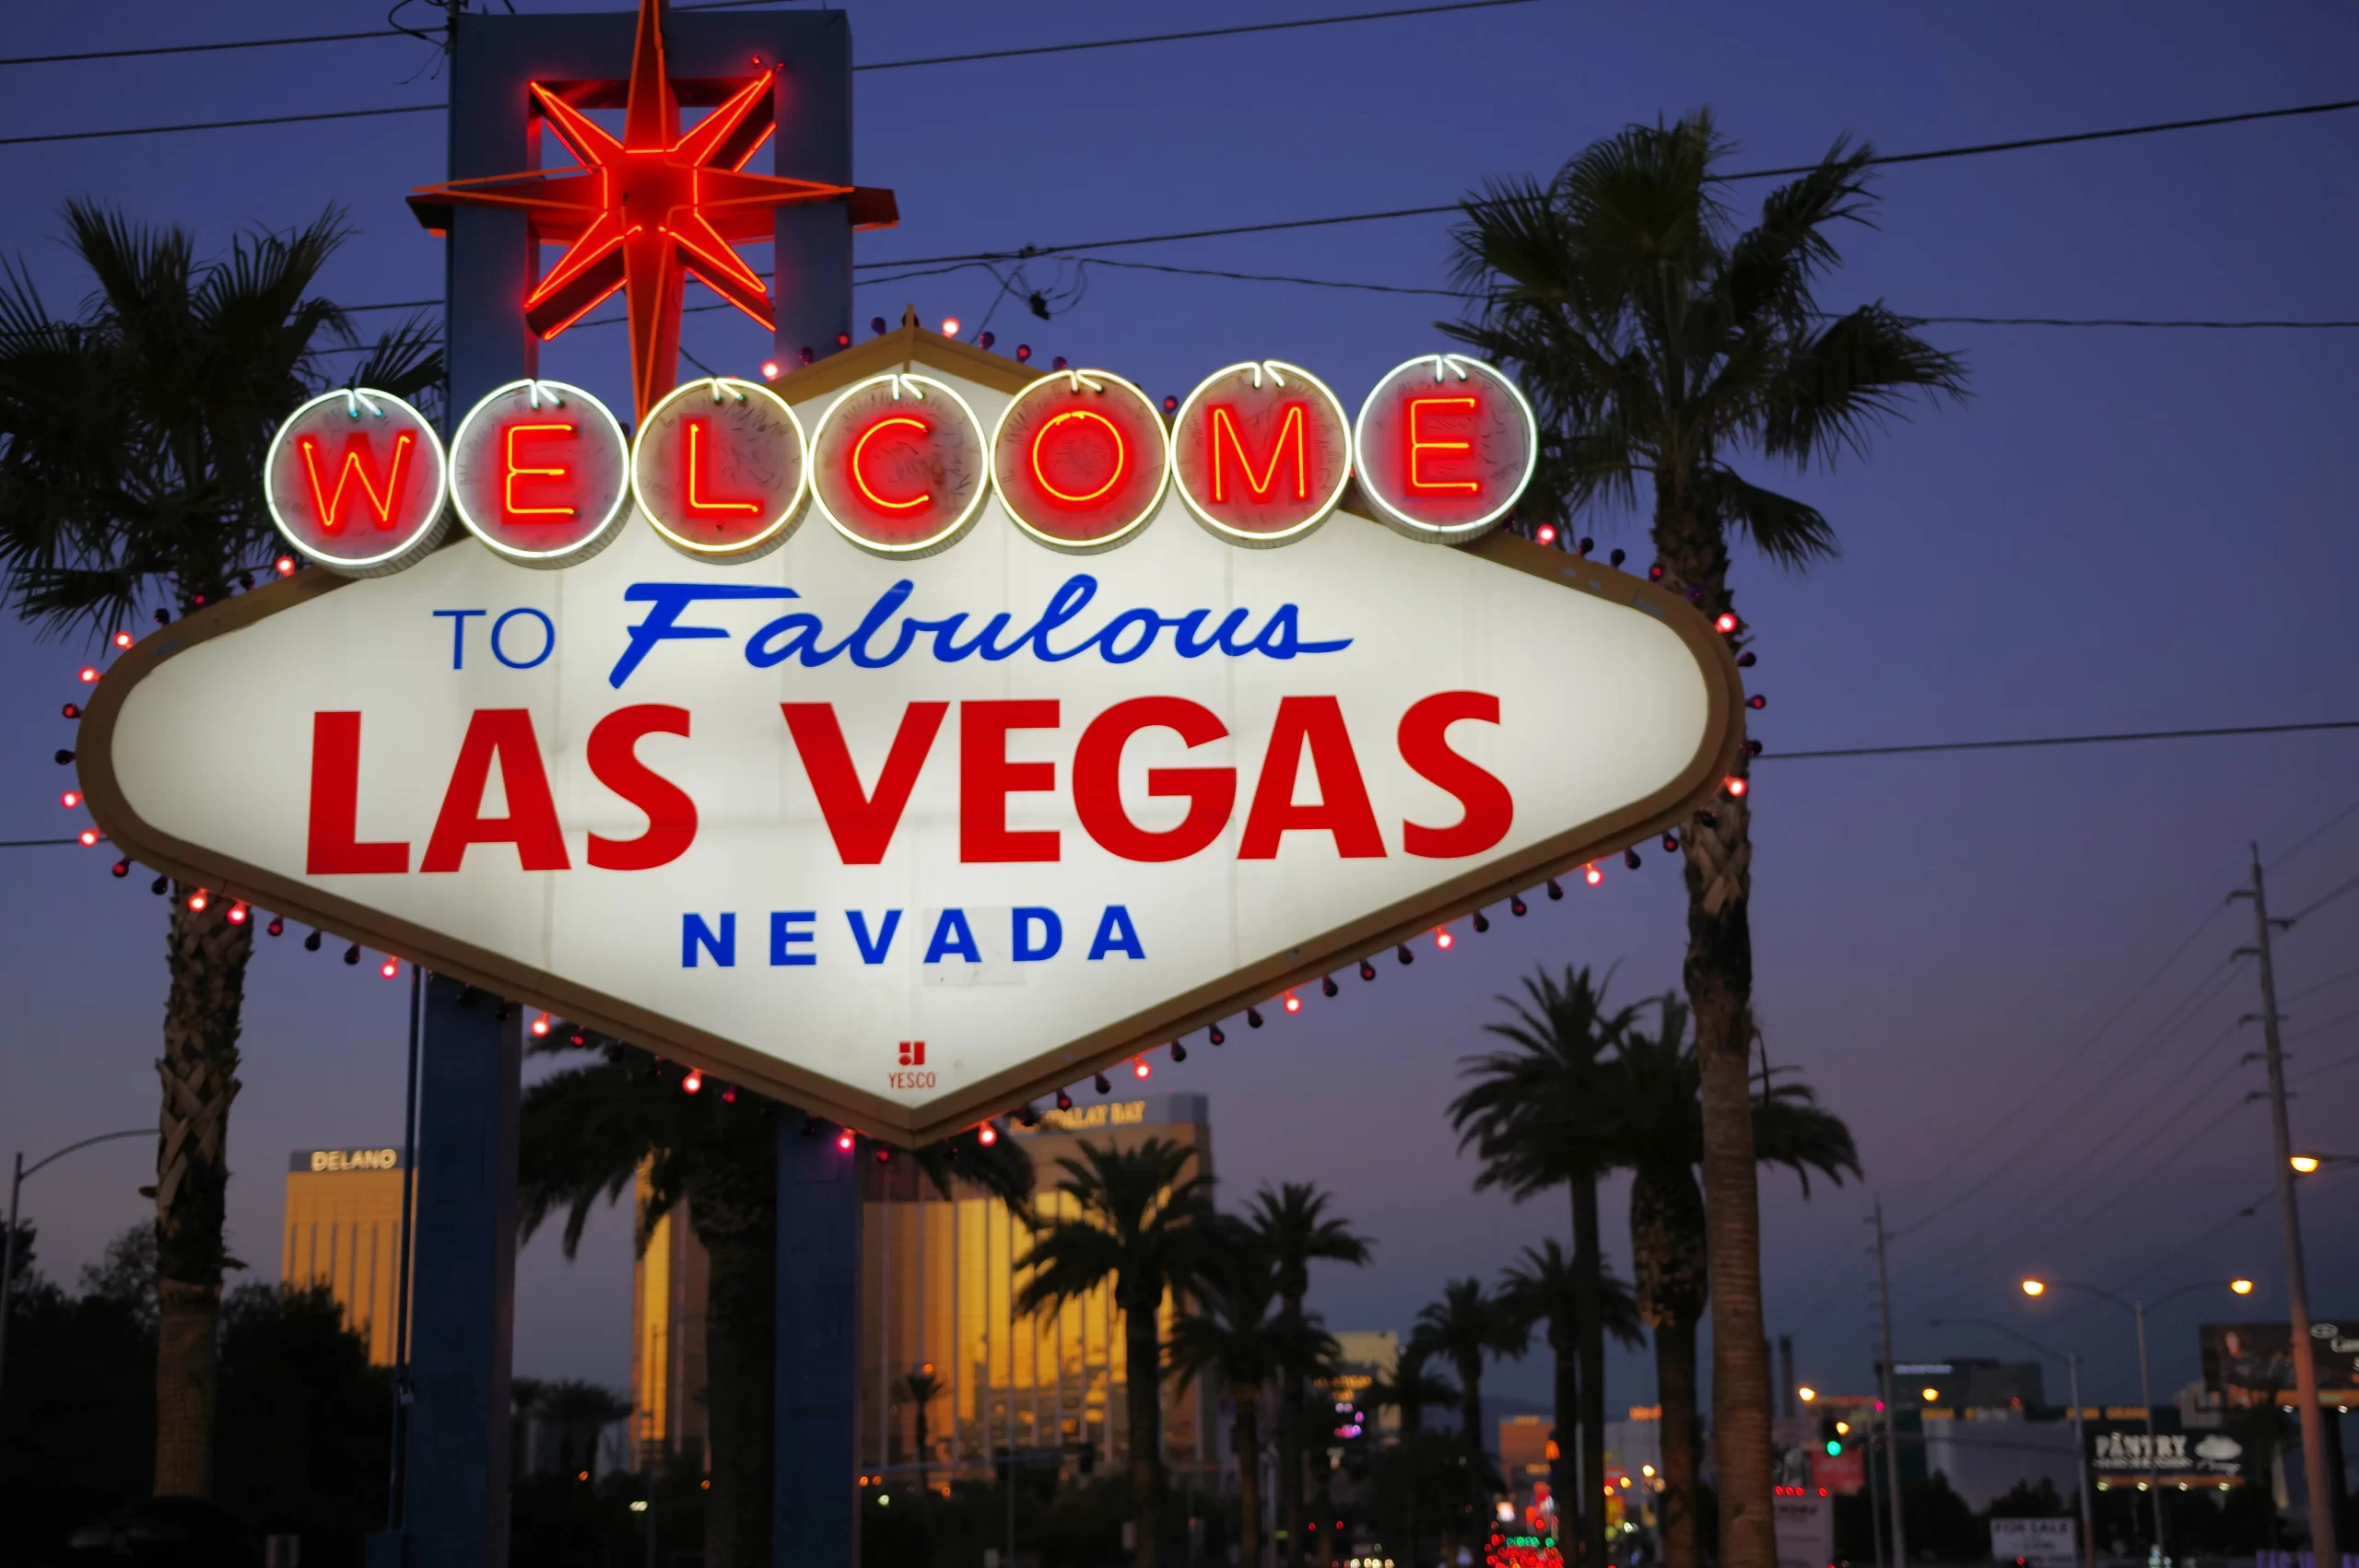 Las Vegas Sign Nightly is one of the iconic landmarks the Las Vegas F1 track is going to pass through during the Grand Prix